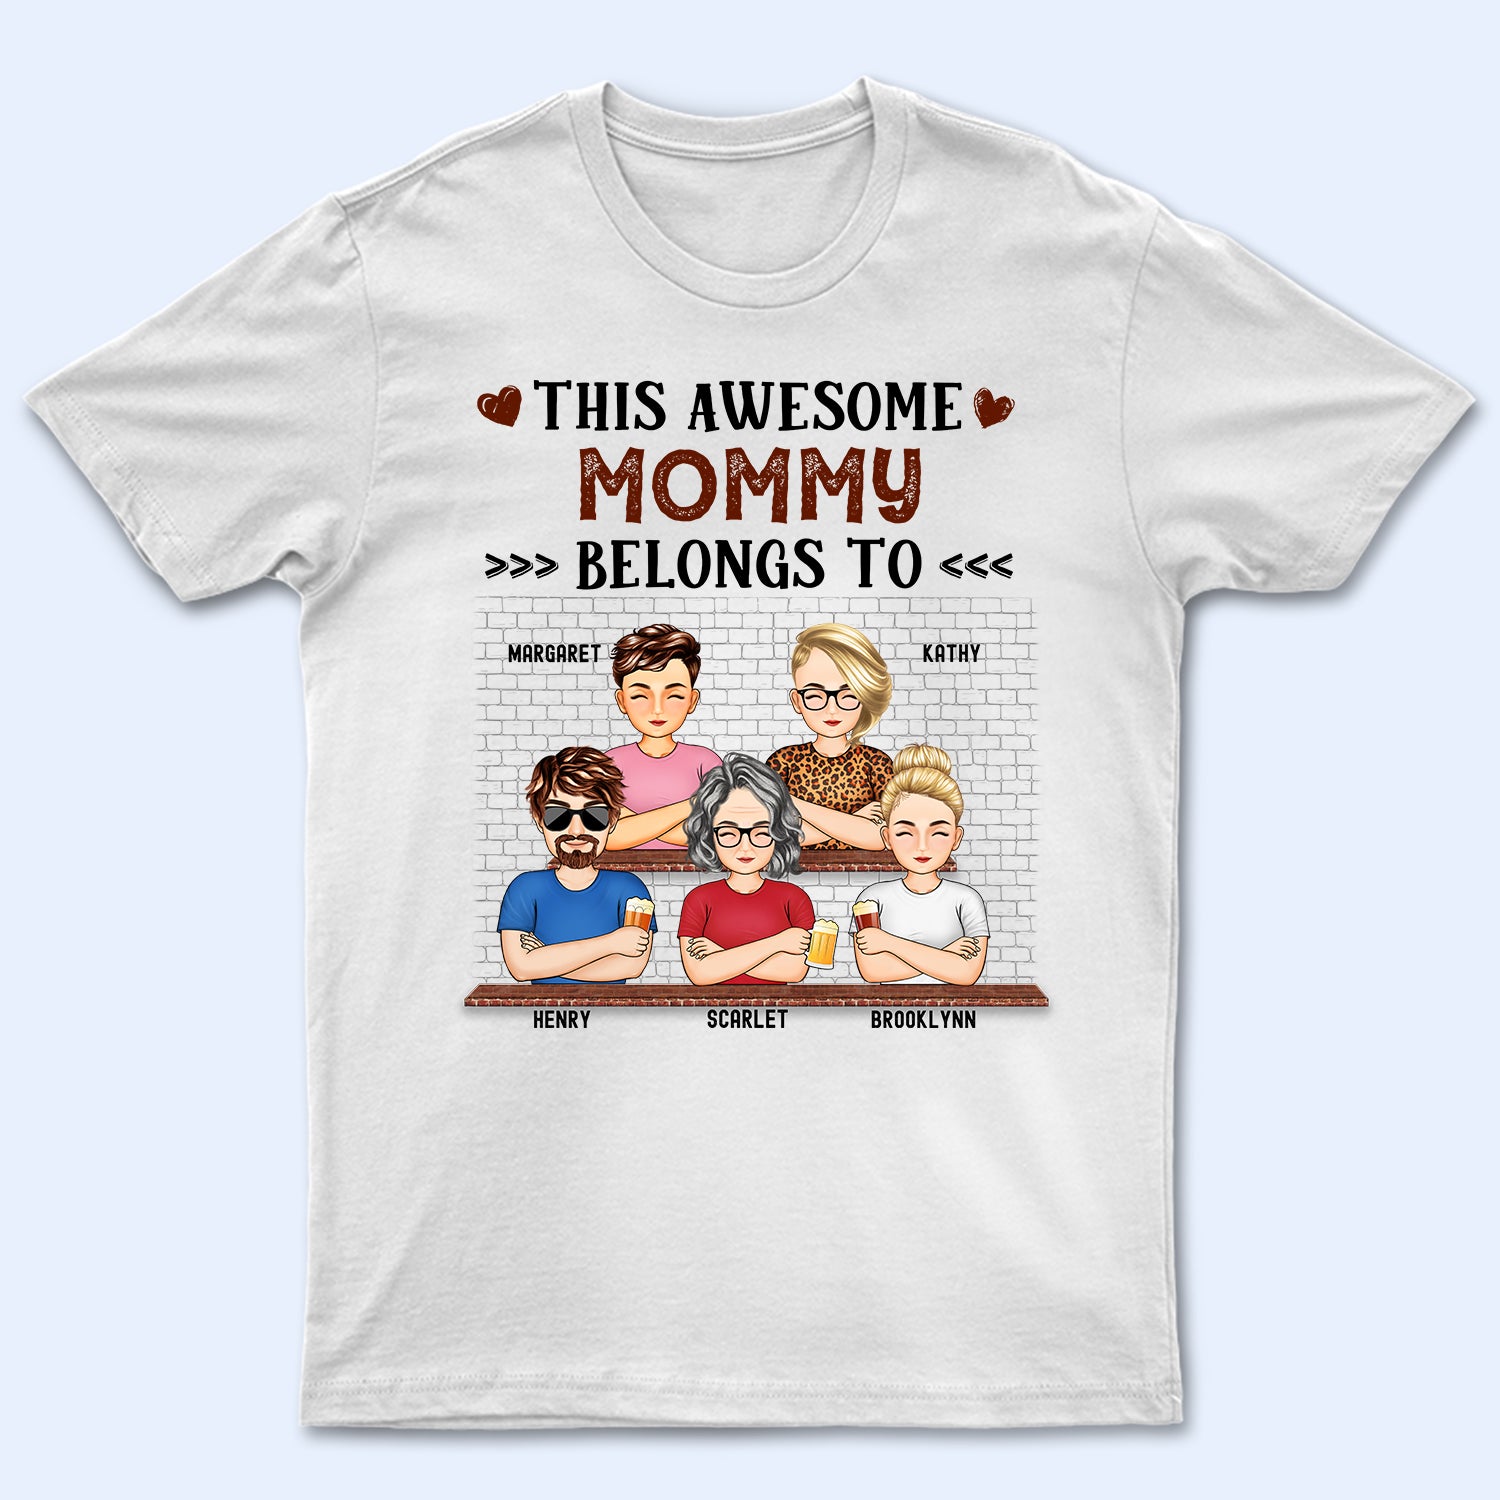 This Awesome Mommy Belongs To - Birthday, Loving Gift For Mother, Grandma - Personalized Custom T Shirt